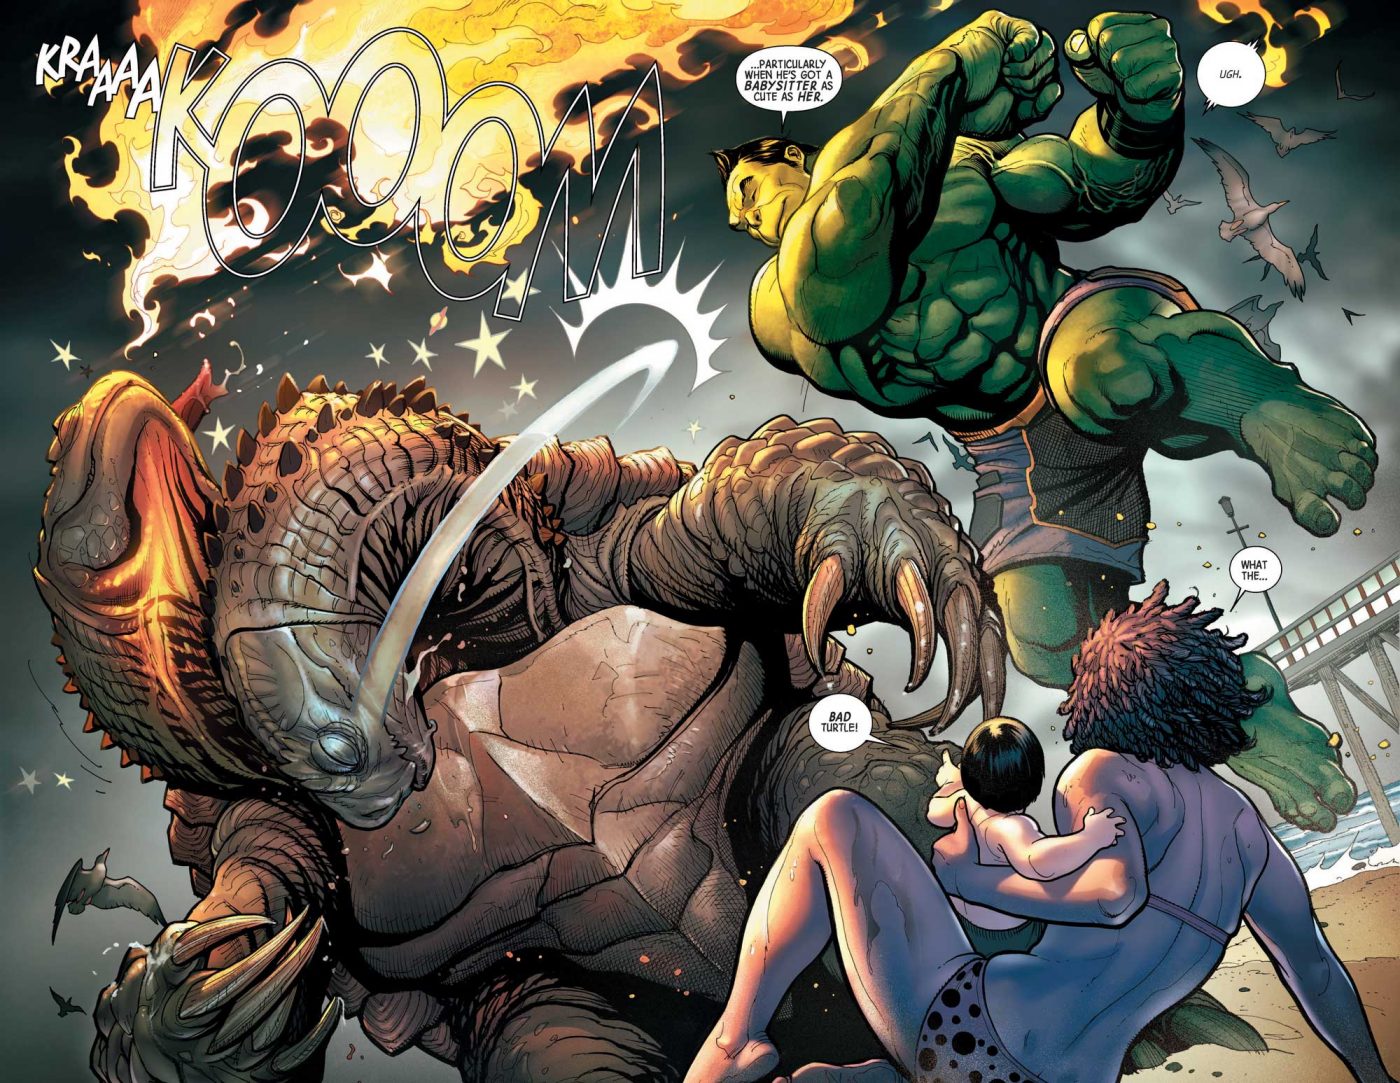 Marvel Preview: The Totally Awesome Hulk #1